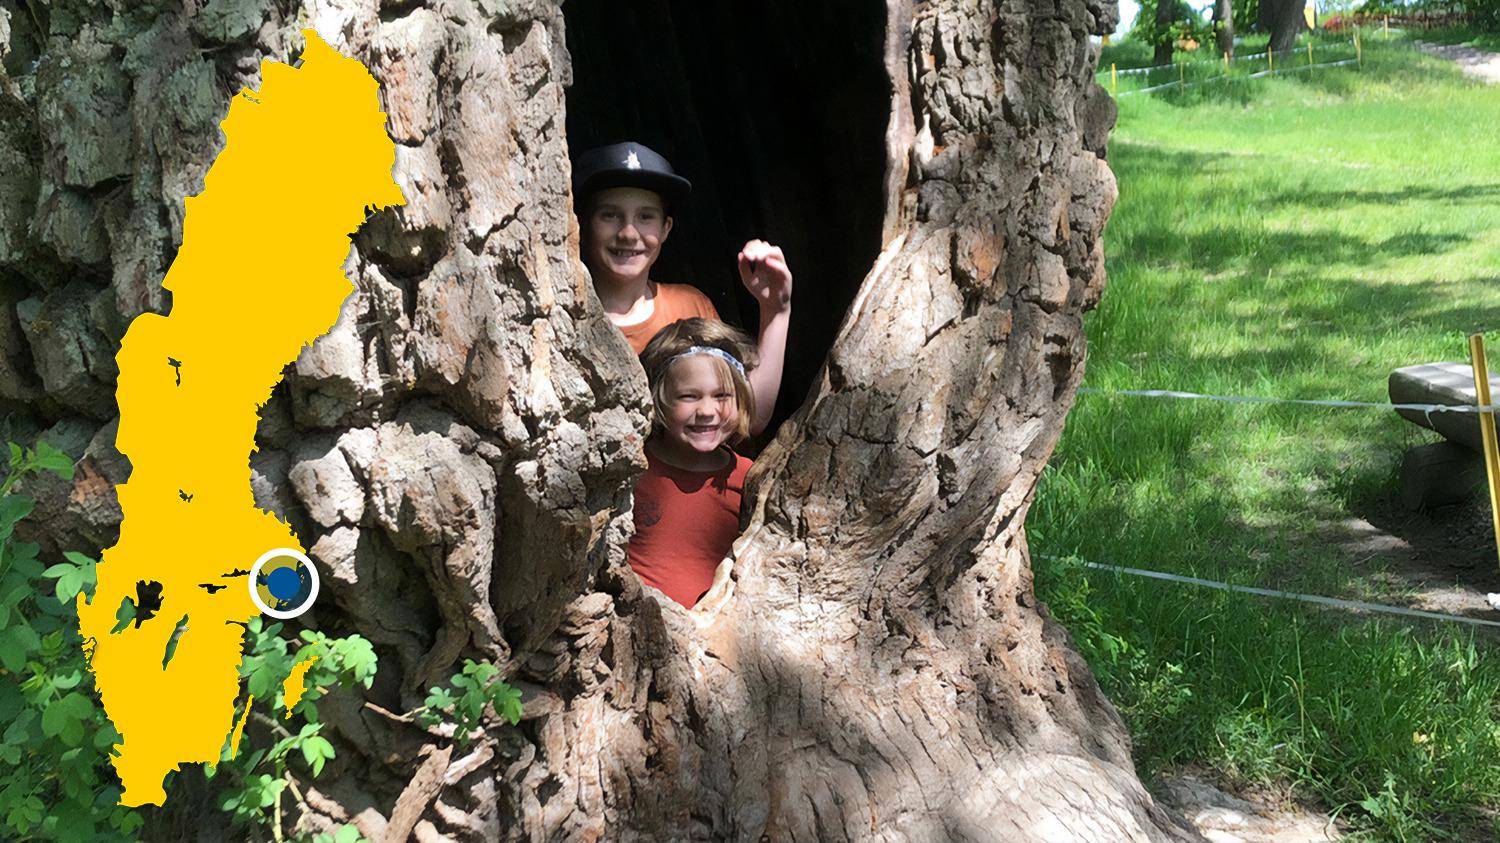 Two children stand in a cavity in a large tree and smile at the camera. There is a yellow map of Sweden with a blue dot that marks Ektorp.